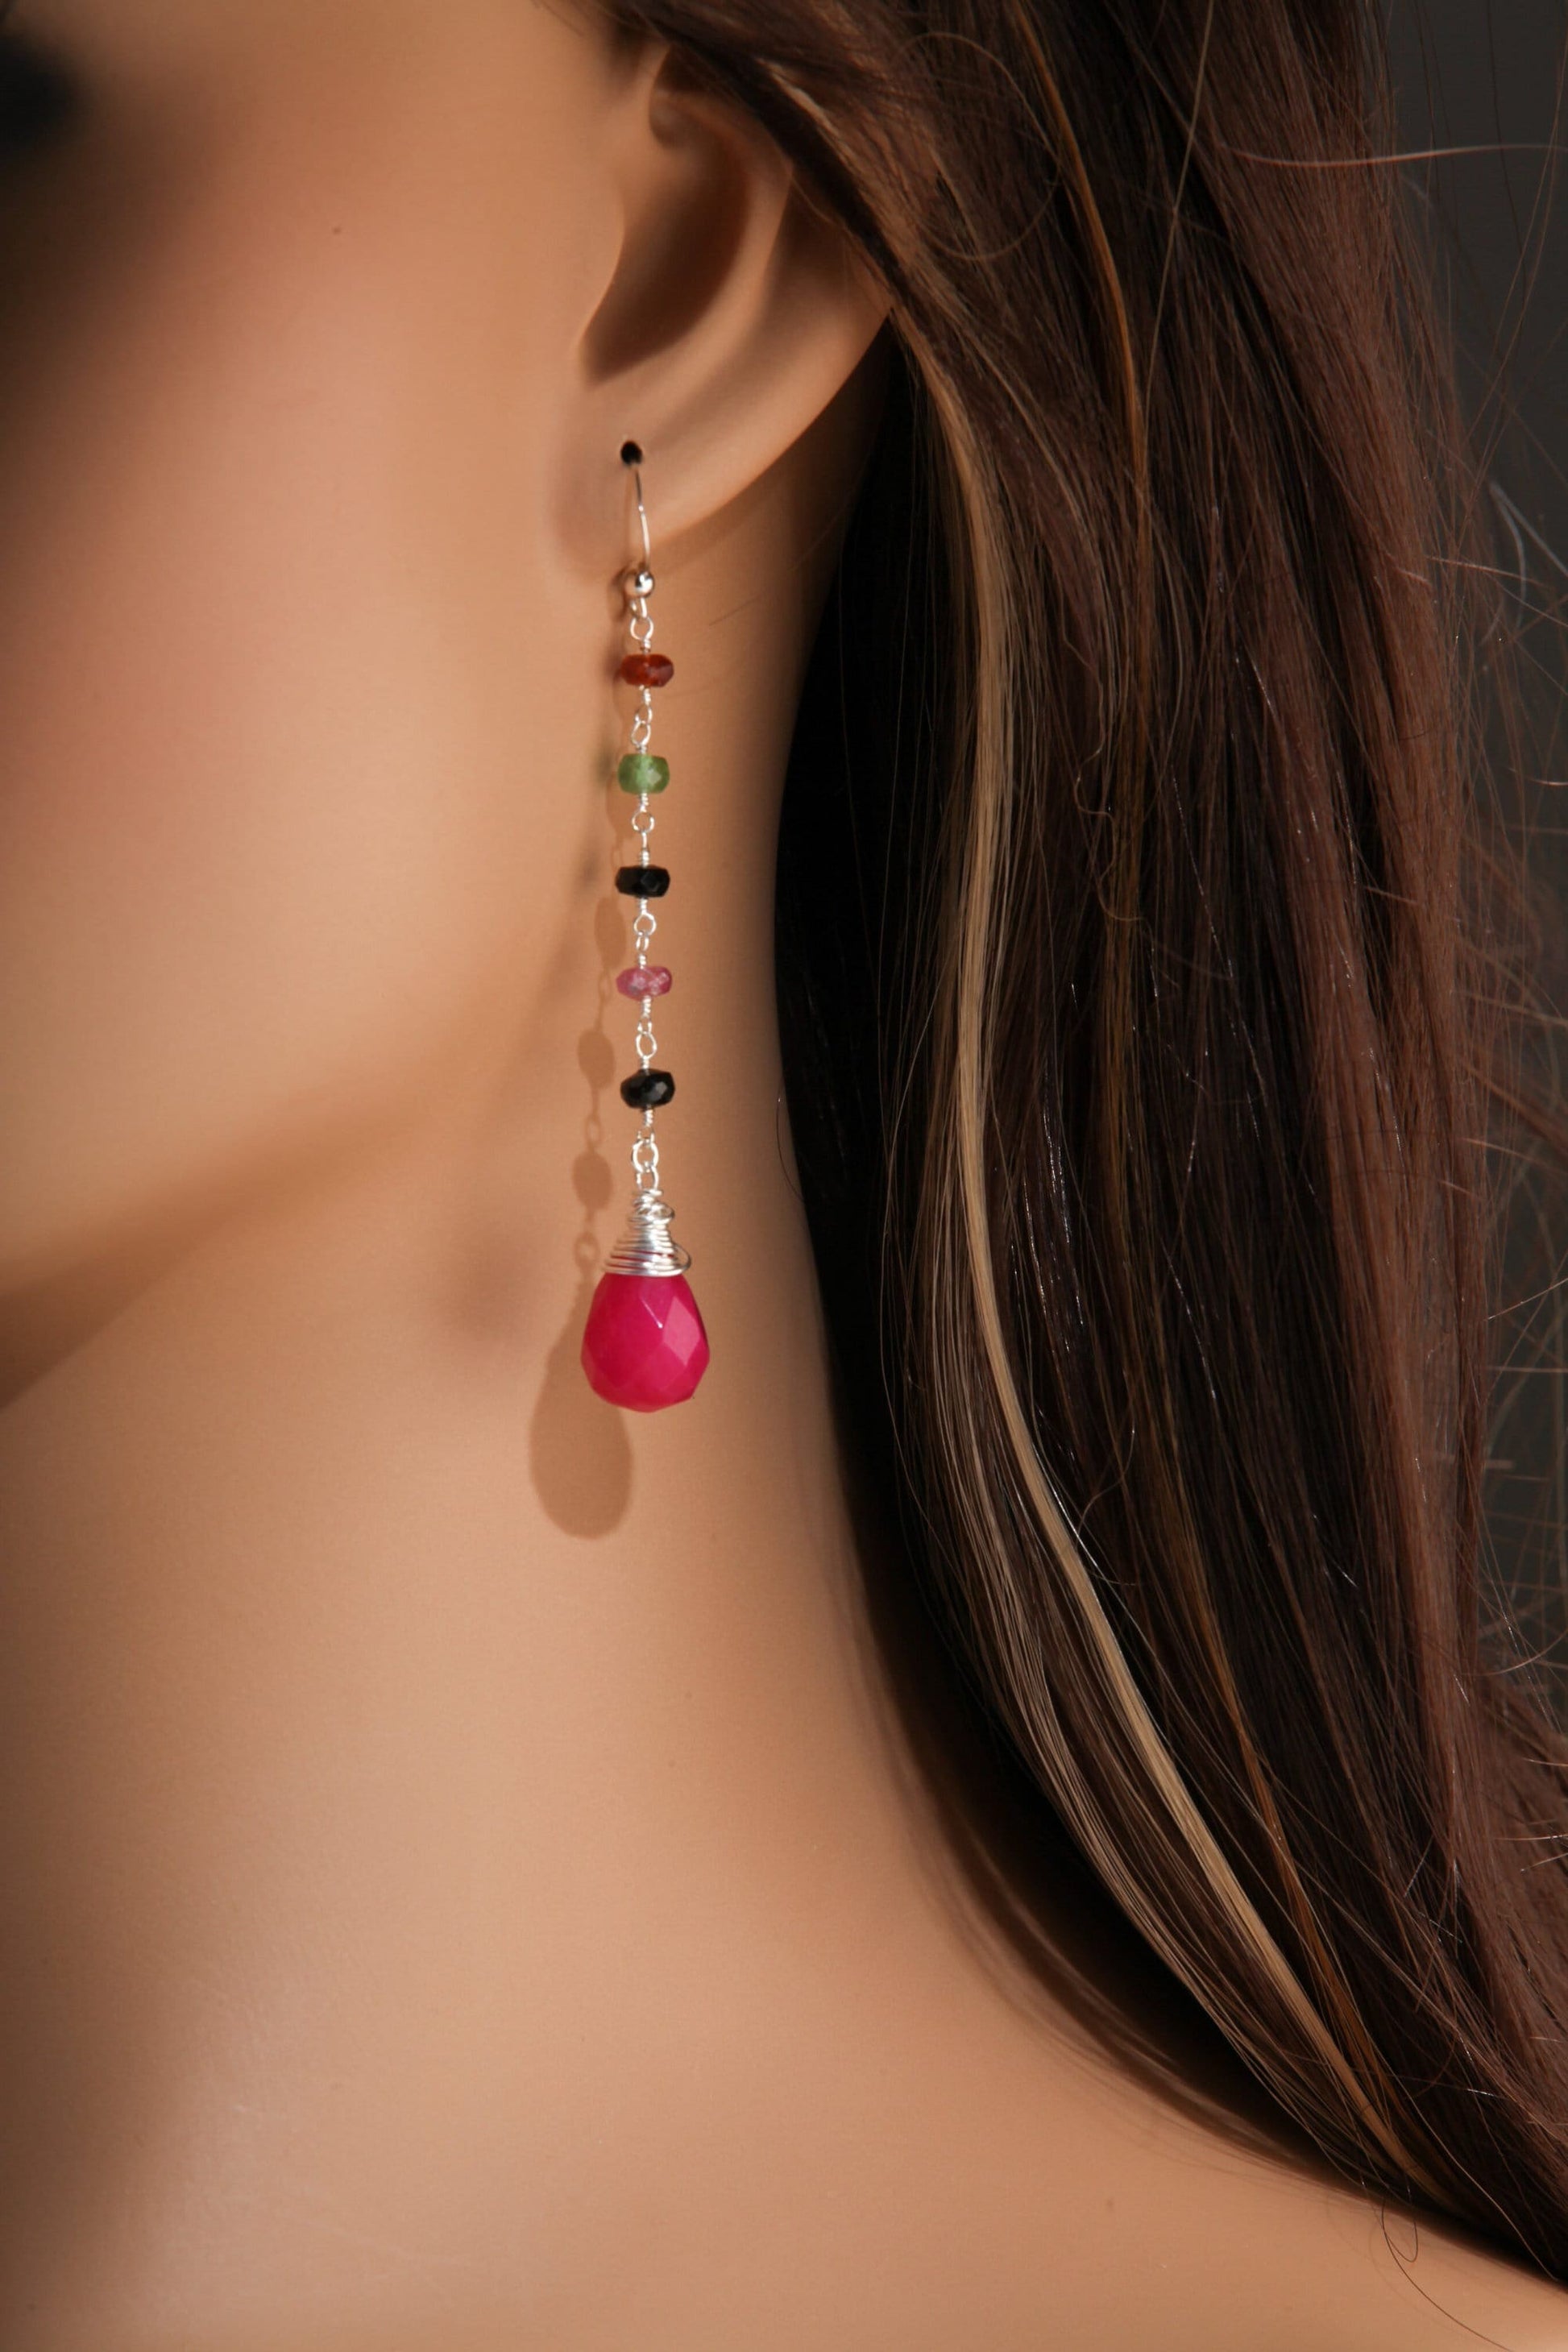 Watermelon Tourmaline Wire Wrapped Dangling Fuchsia Hot Pink Quartz in 925 Sterling Silver Earwire, Handmade Gift For Her